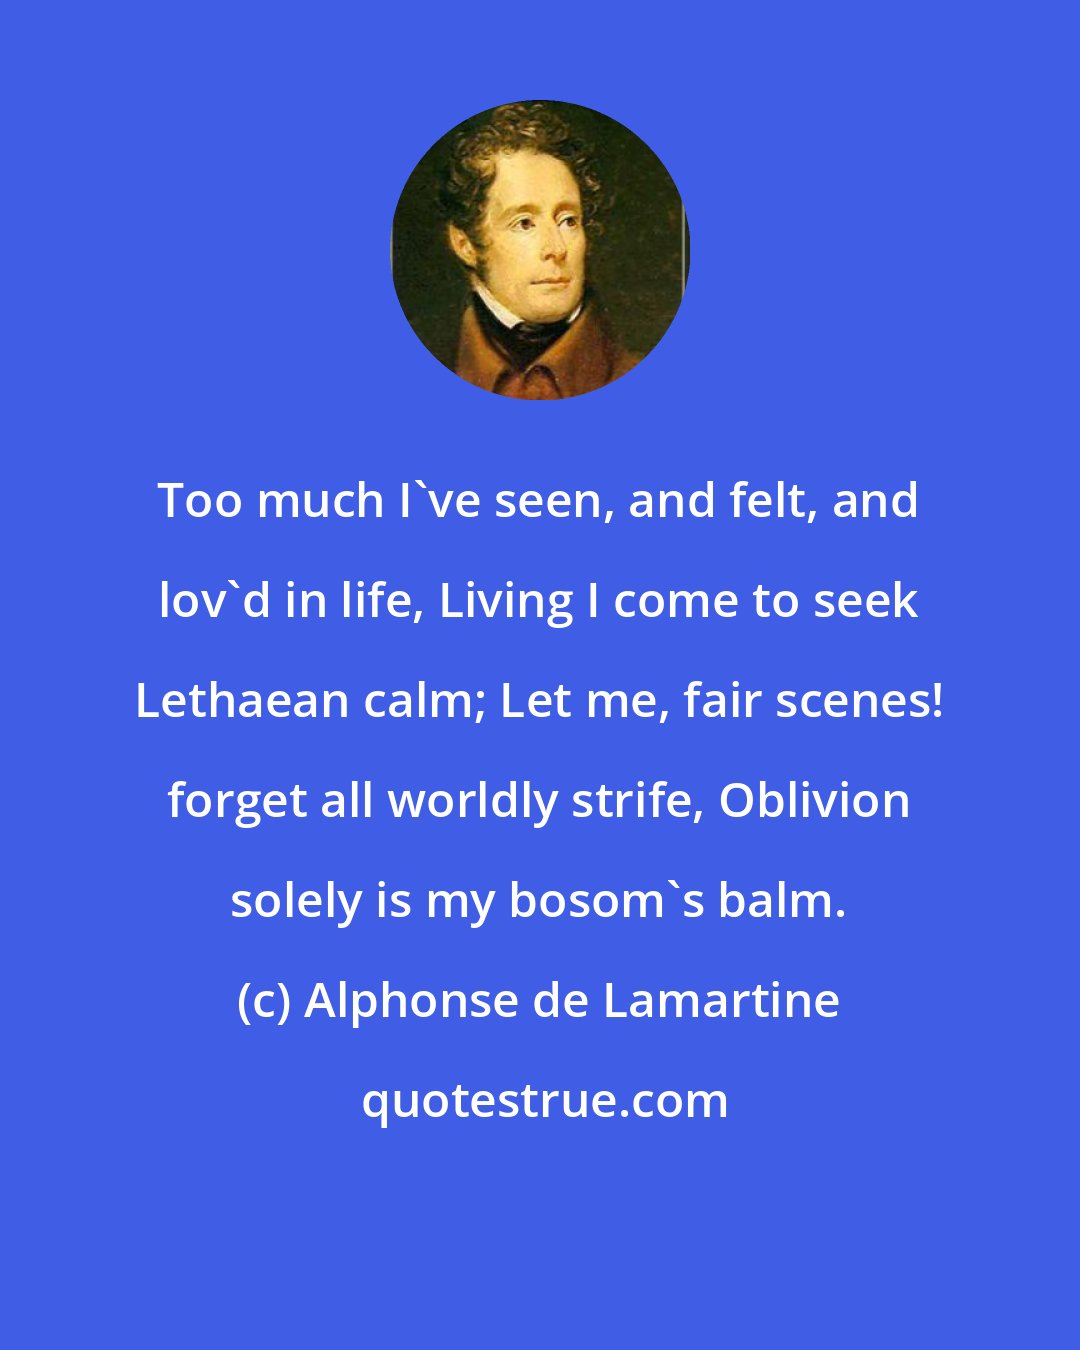 Alphonse de Lamartine: Too much I've seen, and felt, and lov'd in life, Living I come to seek Lethaean calm; Let me, fair scenes! forget all worldly strife, Oblivion solely is my bosom's balm.